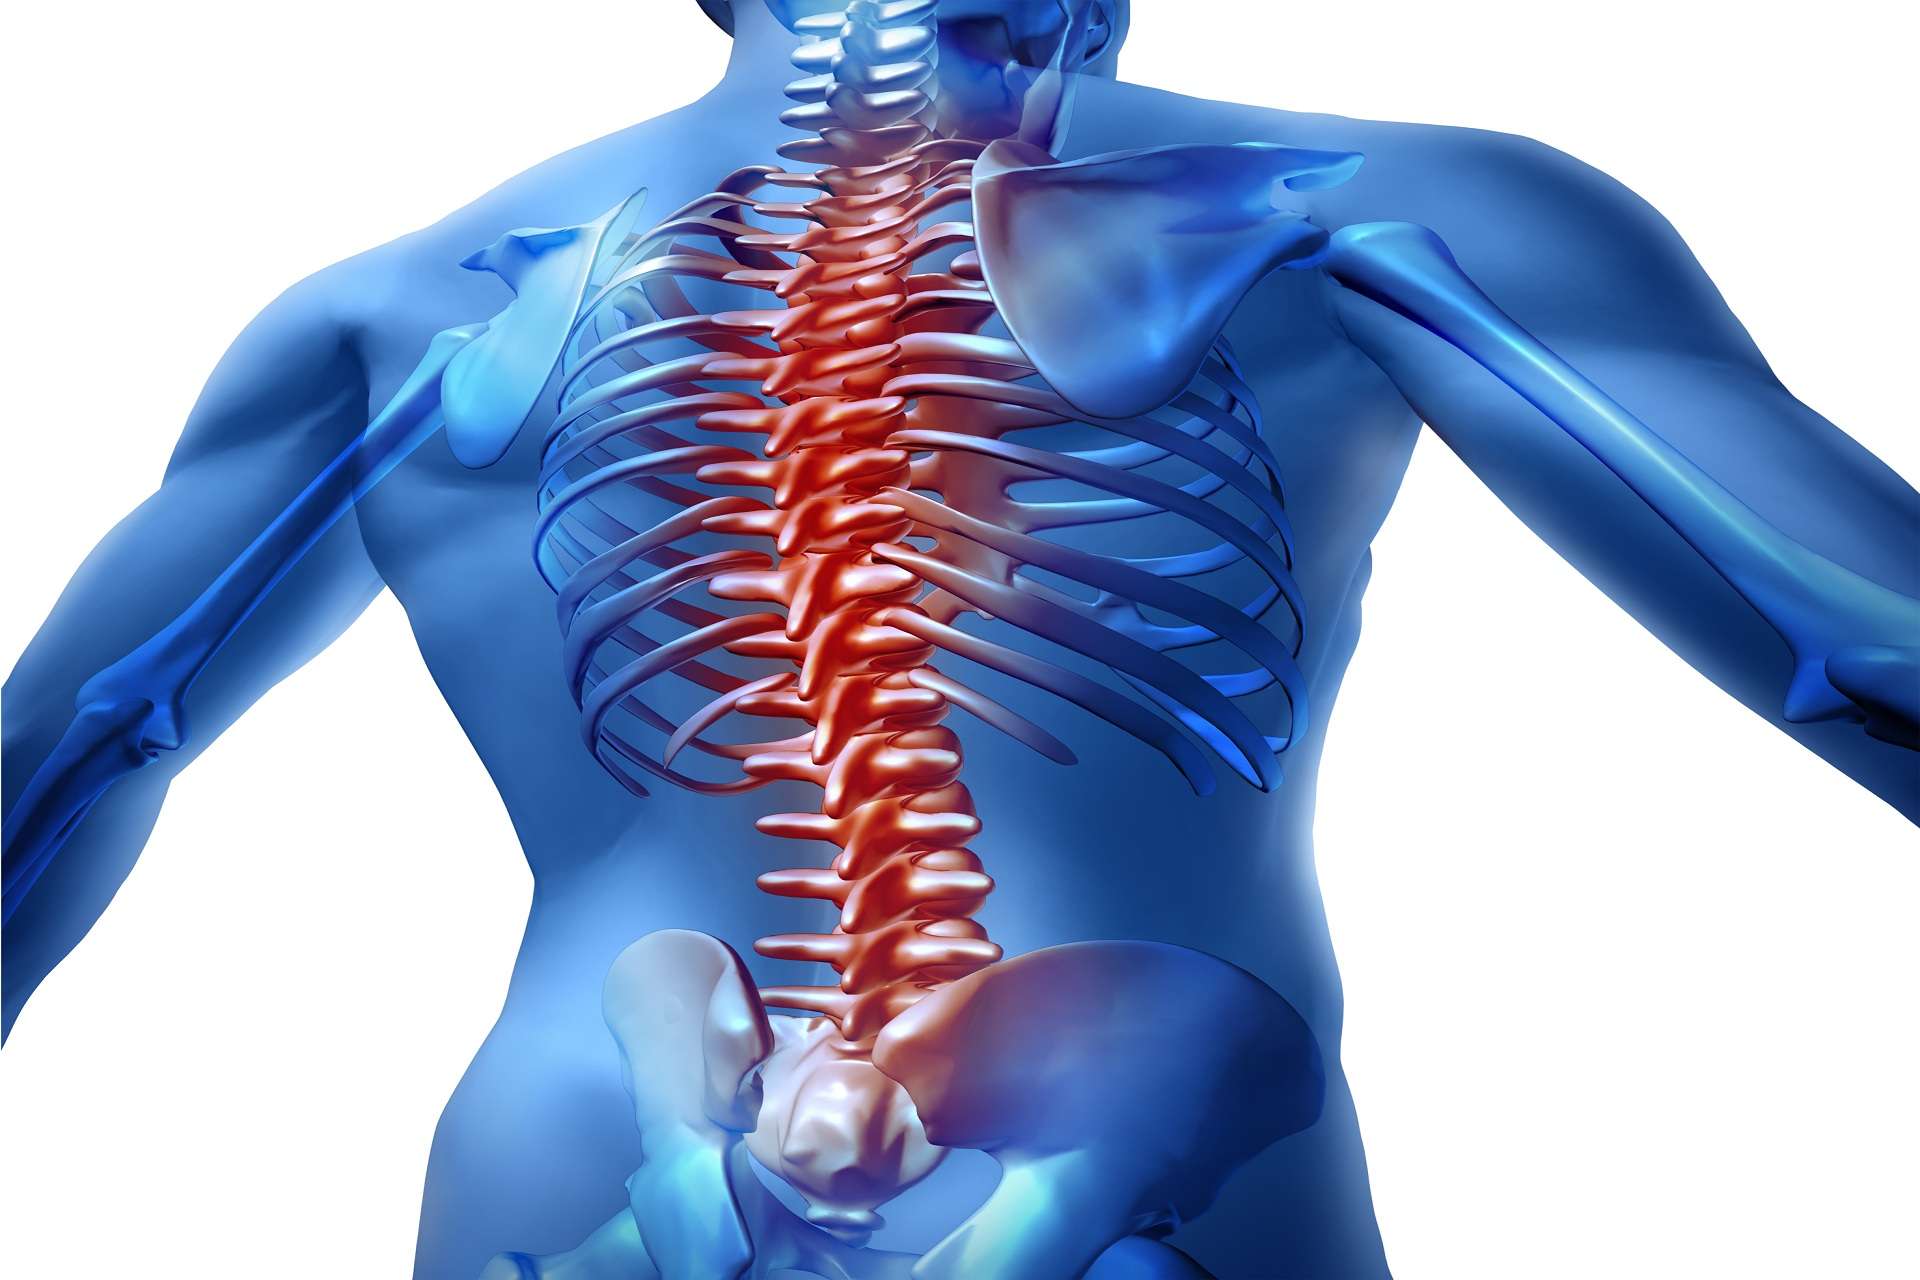 Spinal Cord Stimulator Basics – Guide For Personal Injury Attorneys